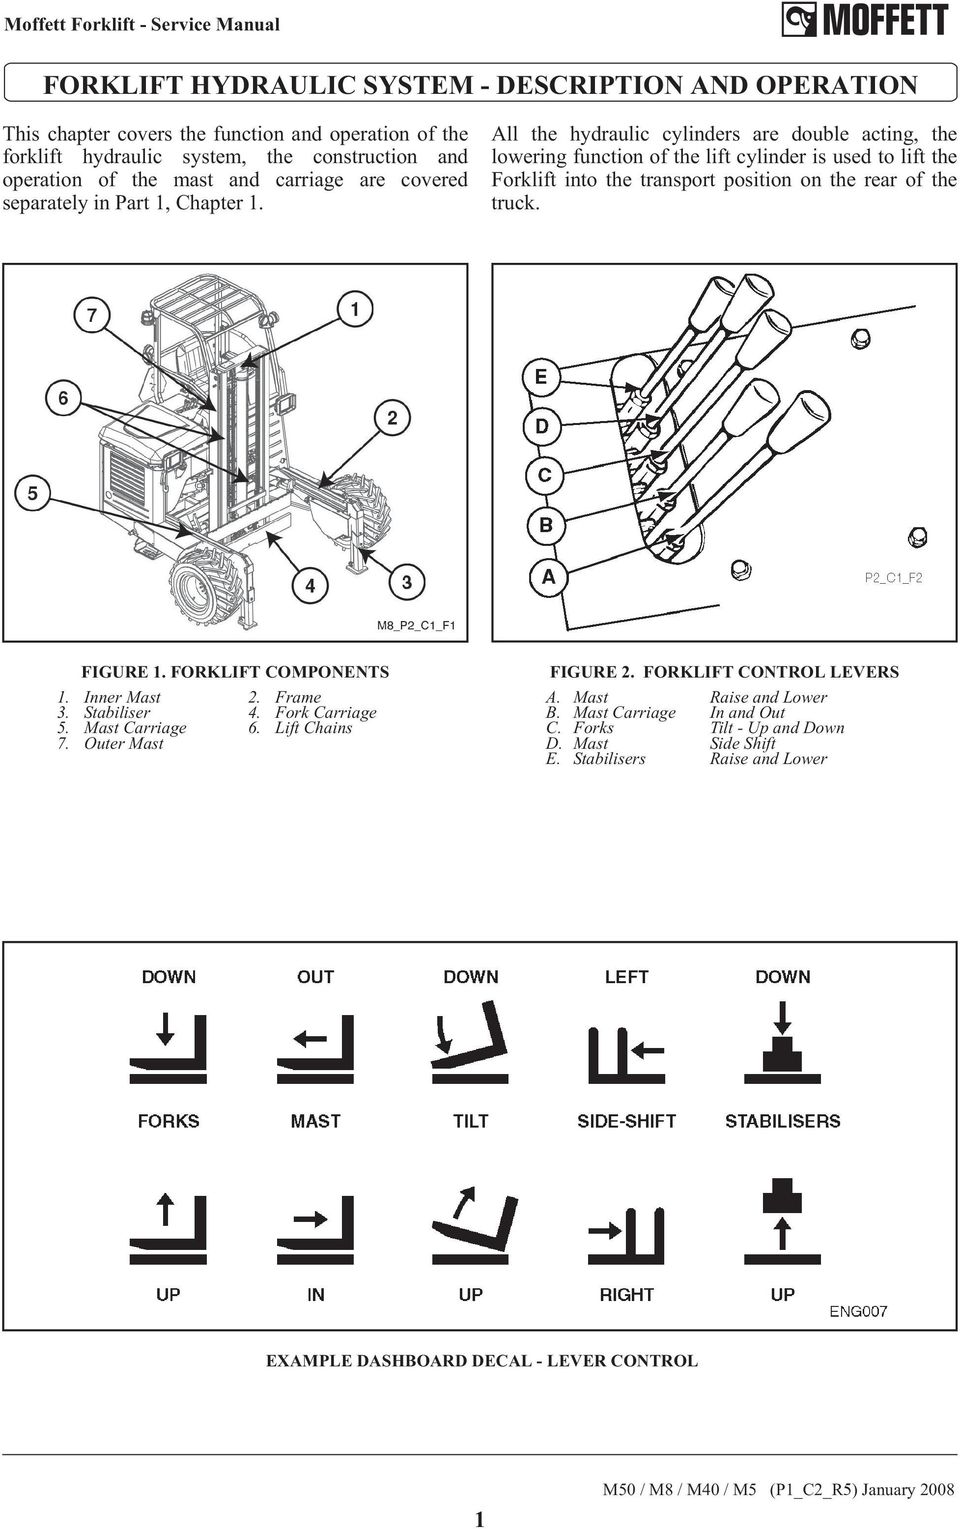 Part 2 Forklift Hydraulic System Pdf Free Download